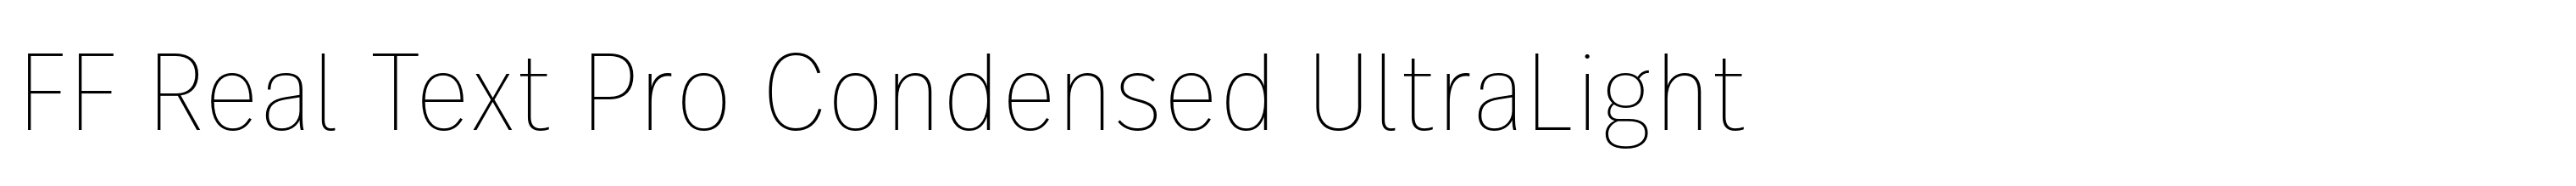 FF Real Text Pro Condensed UltraLight